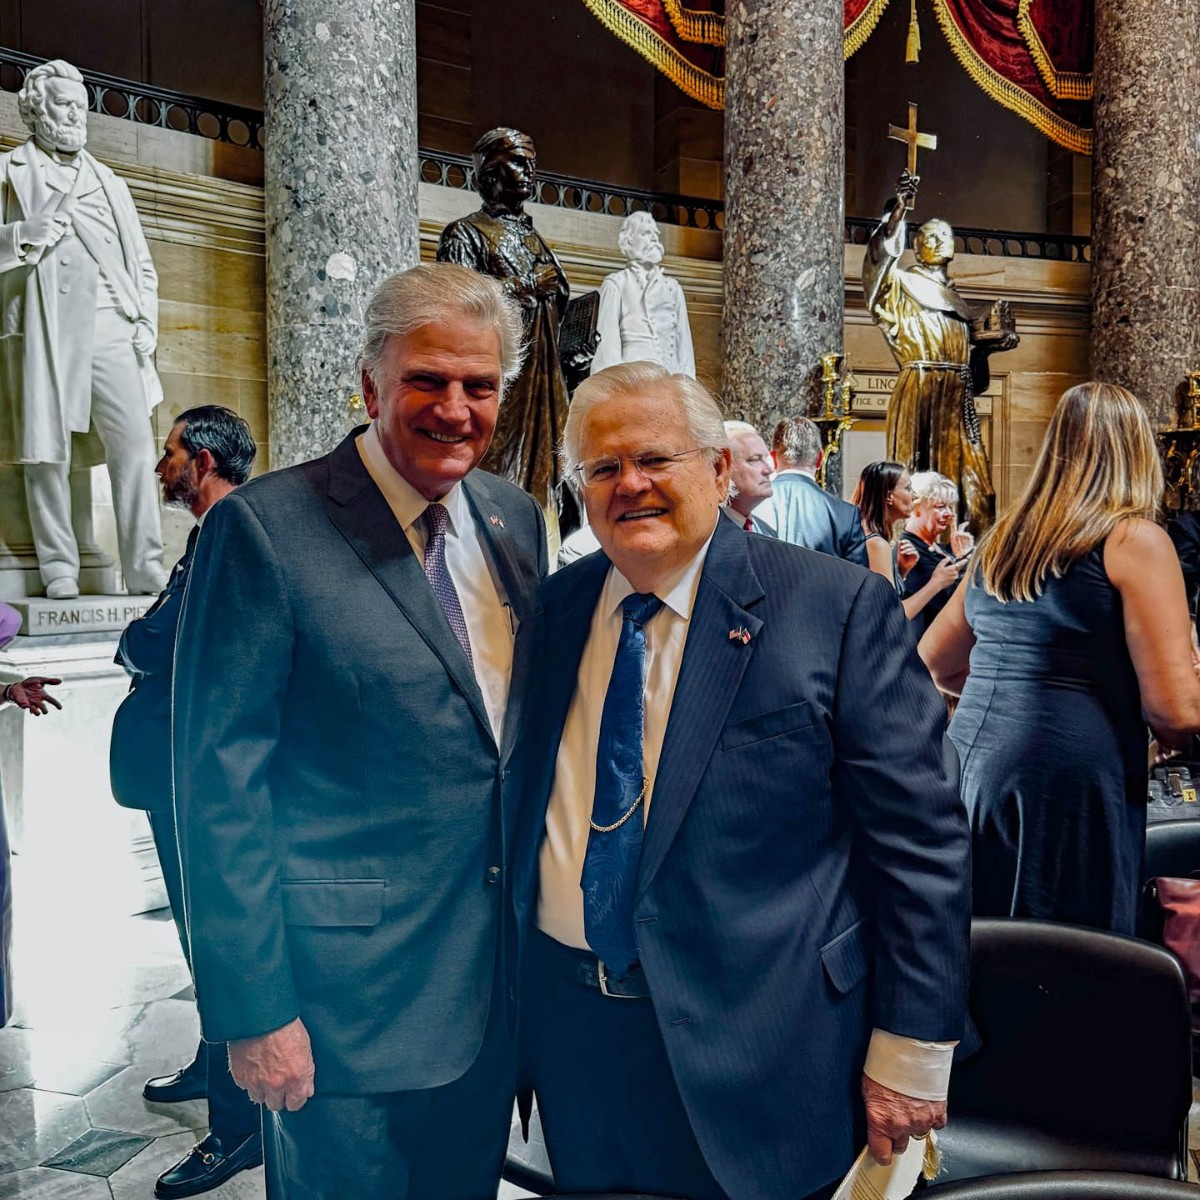 A great privilege to visit with Reverend Franklin Graham at the dedication of his father, Billy Graham's statue in our nation's capitol.